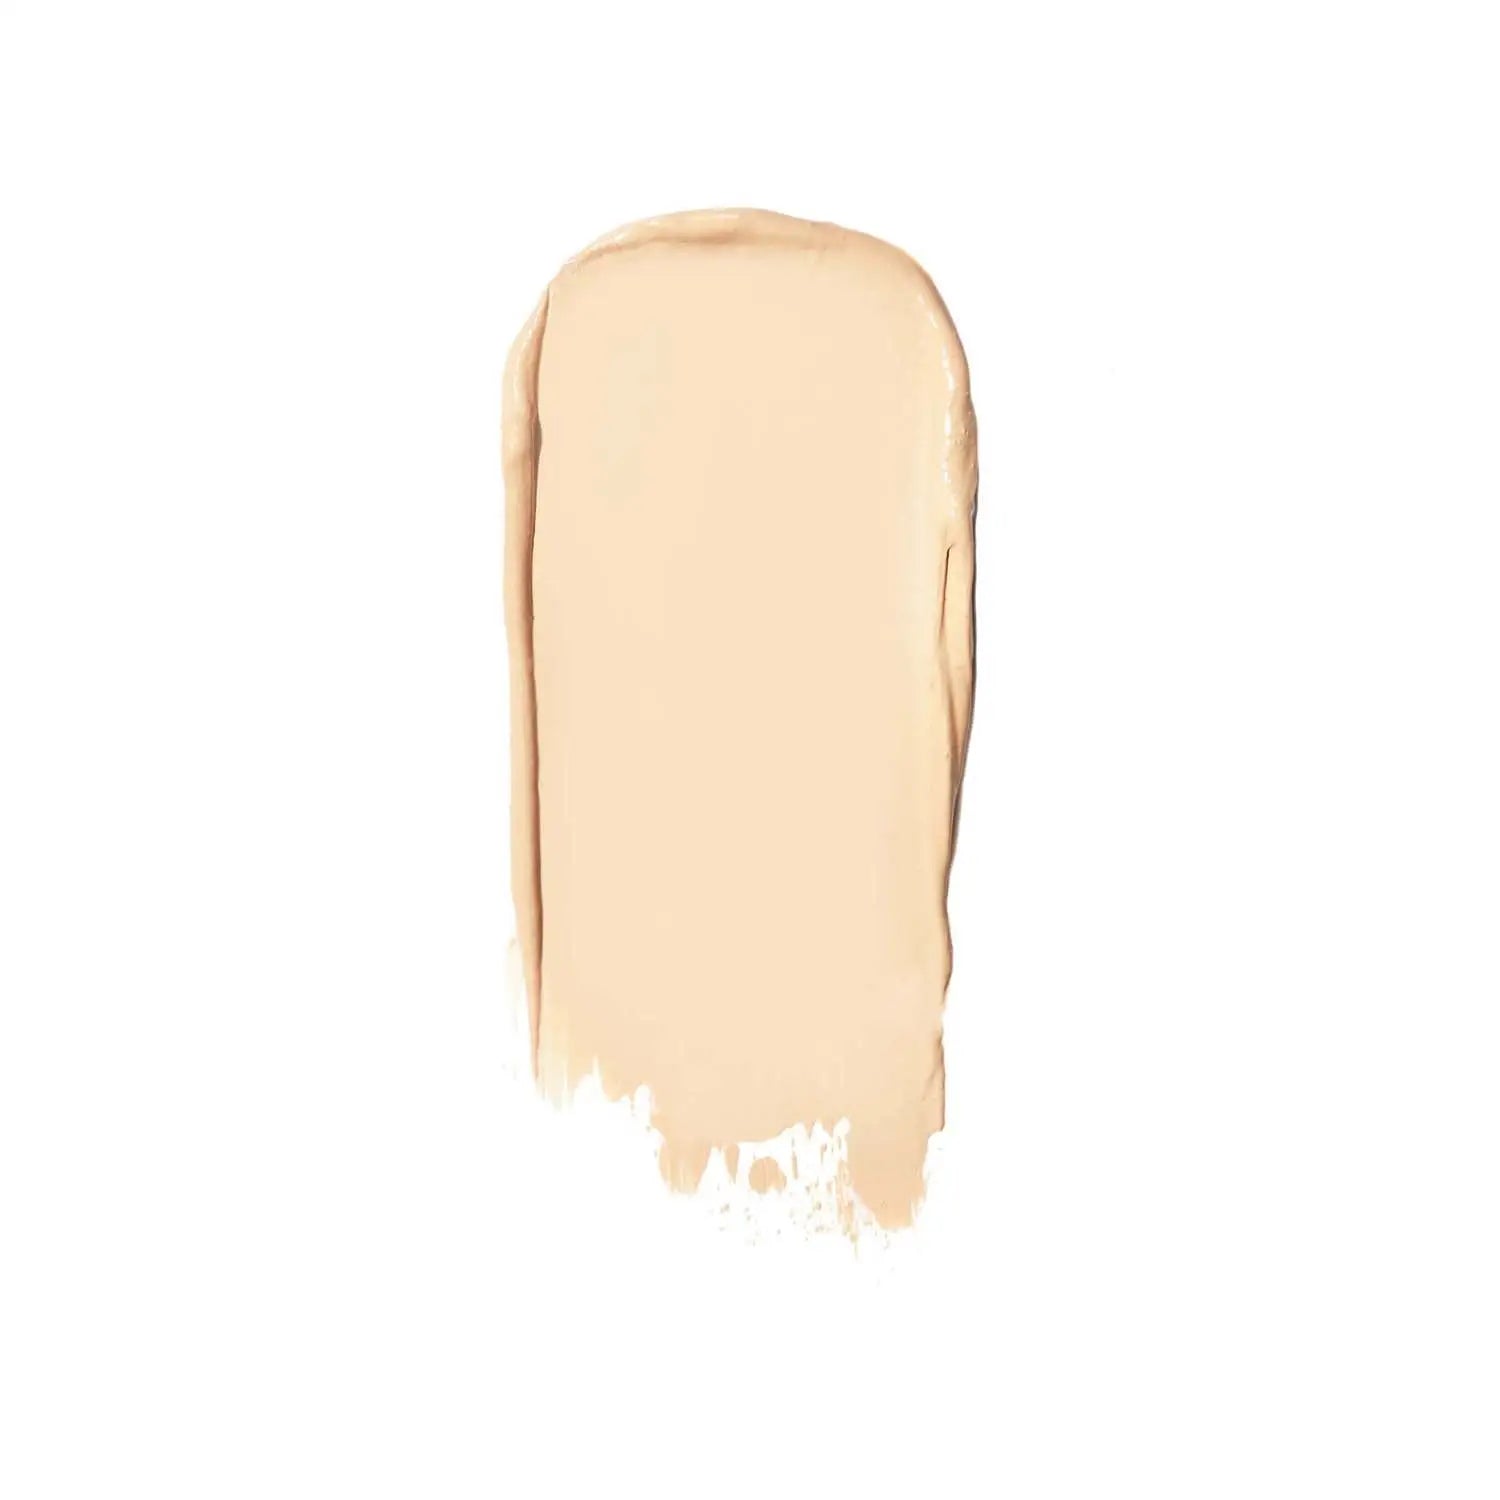 RMS Beauty Un’ Cover-up Cream Foundation 30ml - 00 Free 